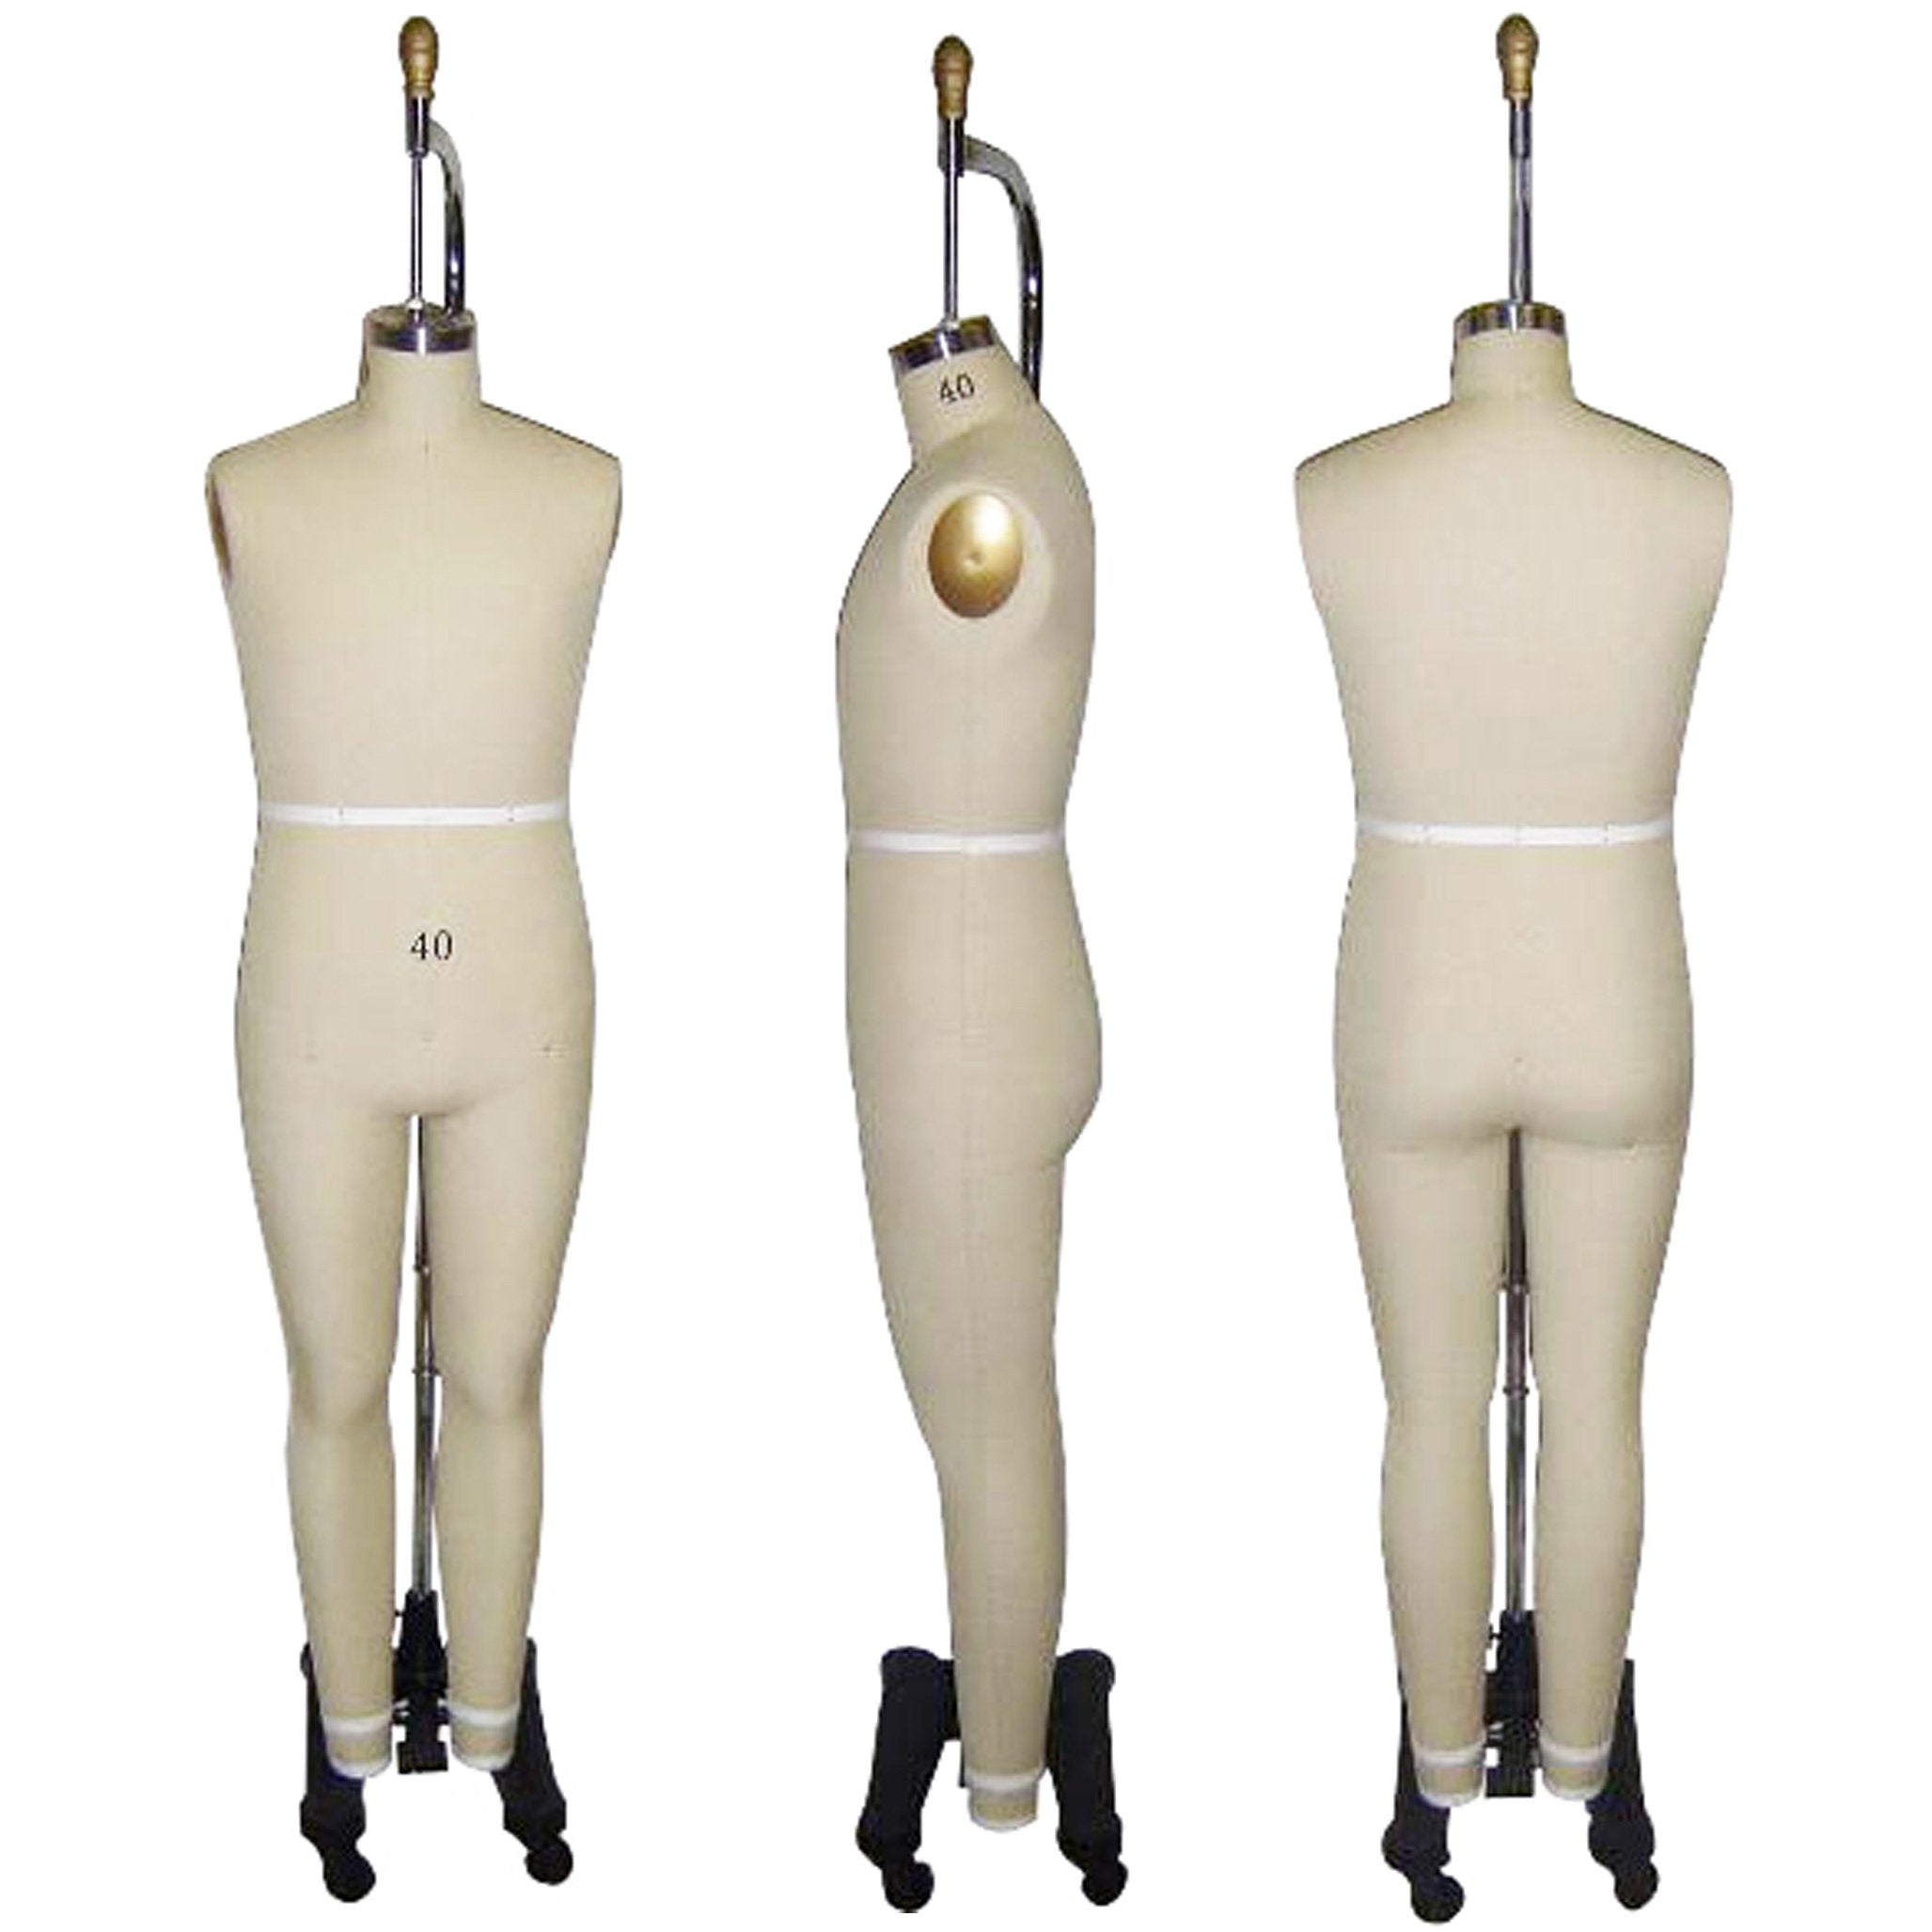 Male Full Body Professional Dress Form & Sewing Mannequin - Dress Forms USA